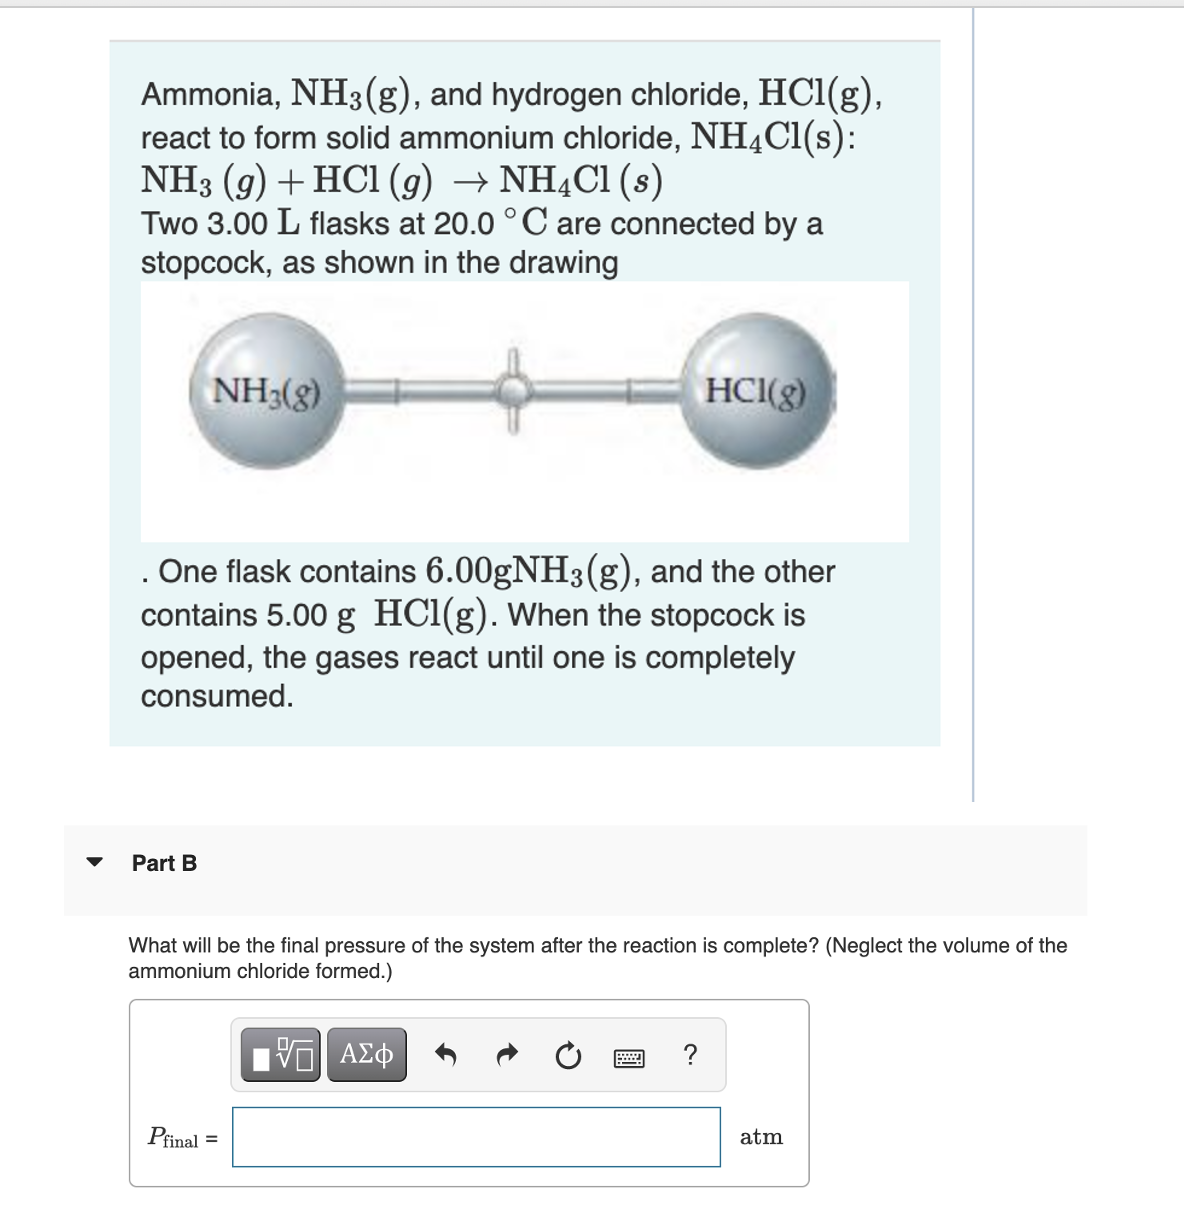 Ammonia, NH3(g), and hydrogen chloride, HCl(g),
react to form solid ammonium chloride, NH4Cl(s):
NH3 (9) + HCl (g) → NH4Cl (s)
Two 3.00 L flasks at 20.0 °C are connected by a
stopcock, as shown in the drawing
NH3(g)
Part B
. One flask contains 6.00gNH3(g), and the other
contains 5.00 g HCl(g). When the stopcock is
opened, the gases react until one is completely
consumed.
HCI(g)
What will be the final pressure of the system after the reaction is complete? (Neglect the volume of the
ammonium chloride formed.)
VE ΑΣΦ
Pfinal =
atm